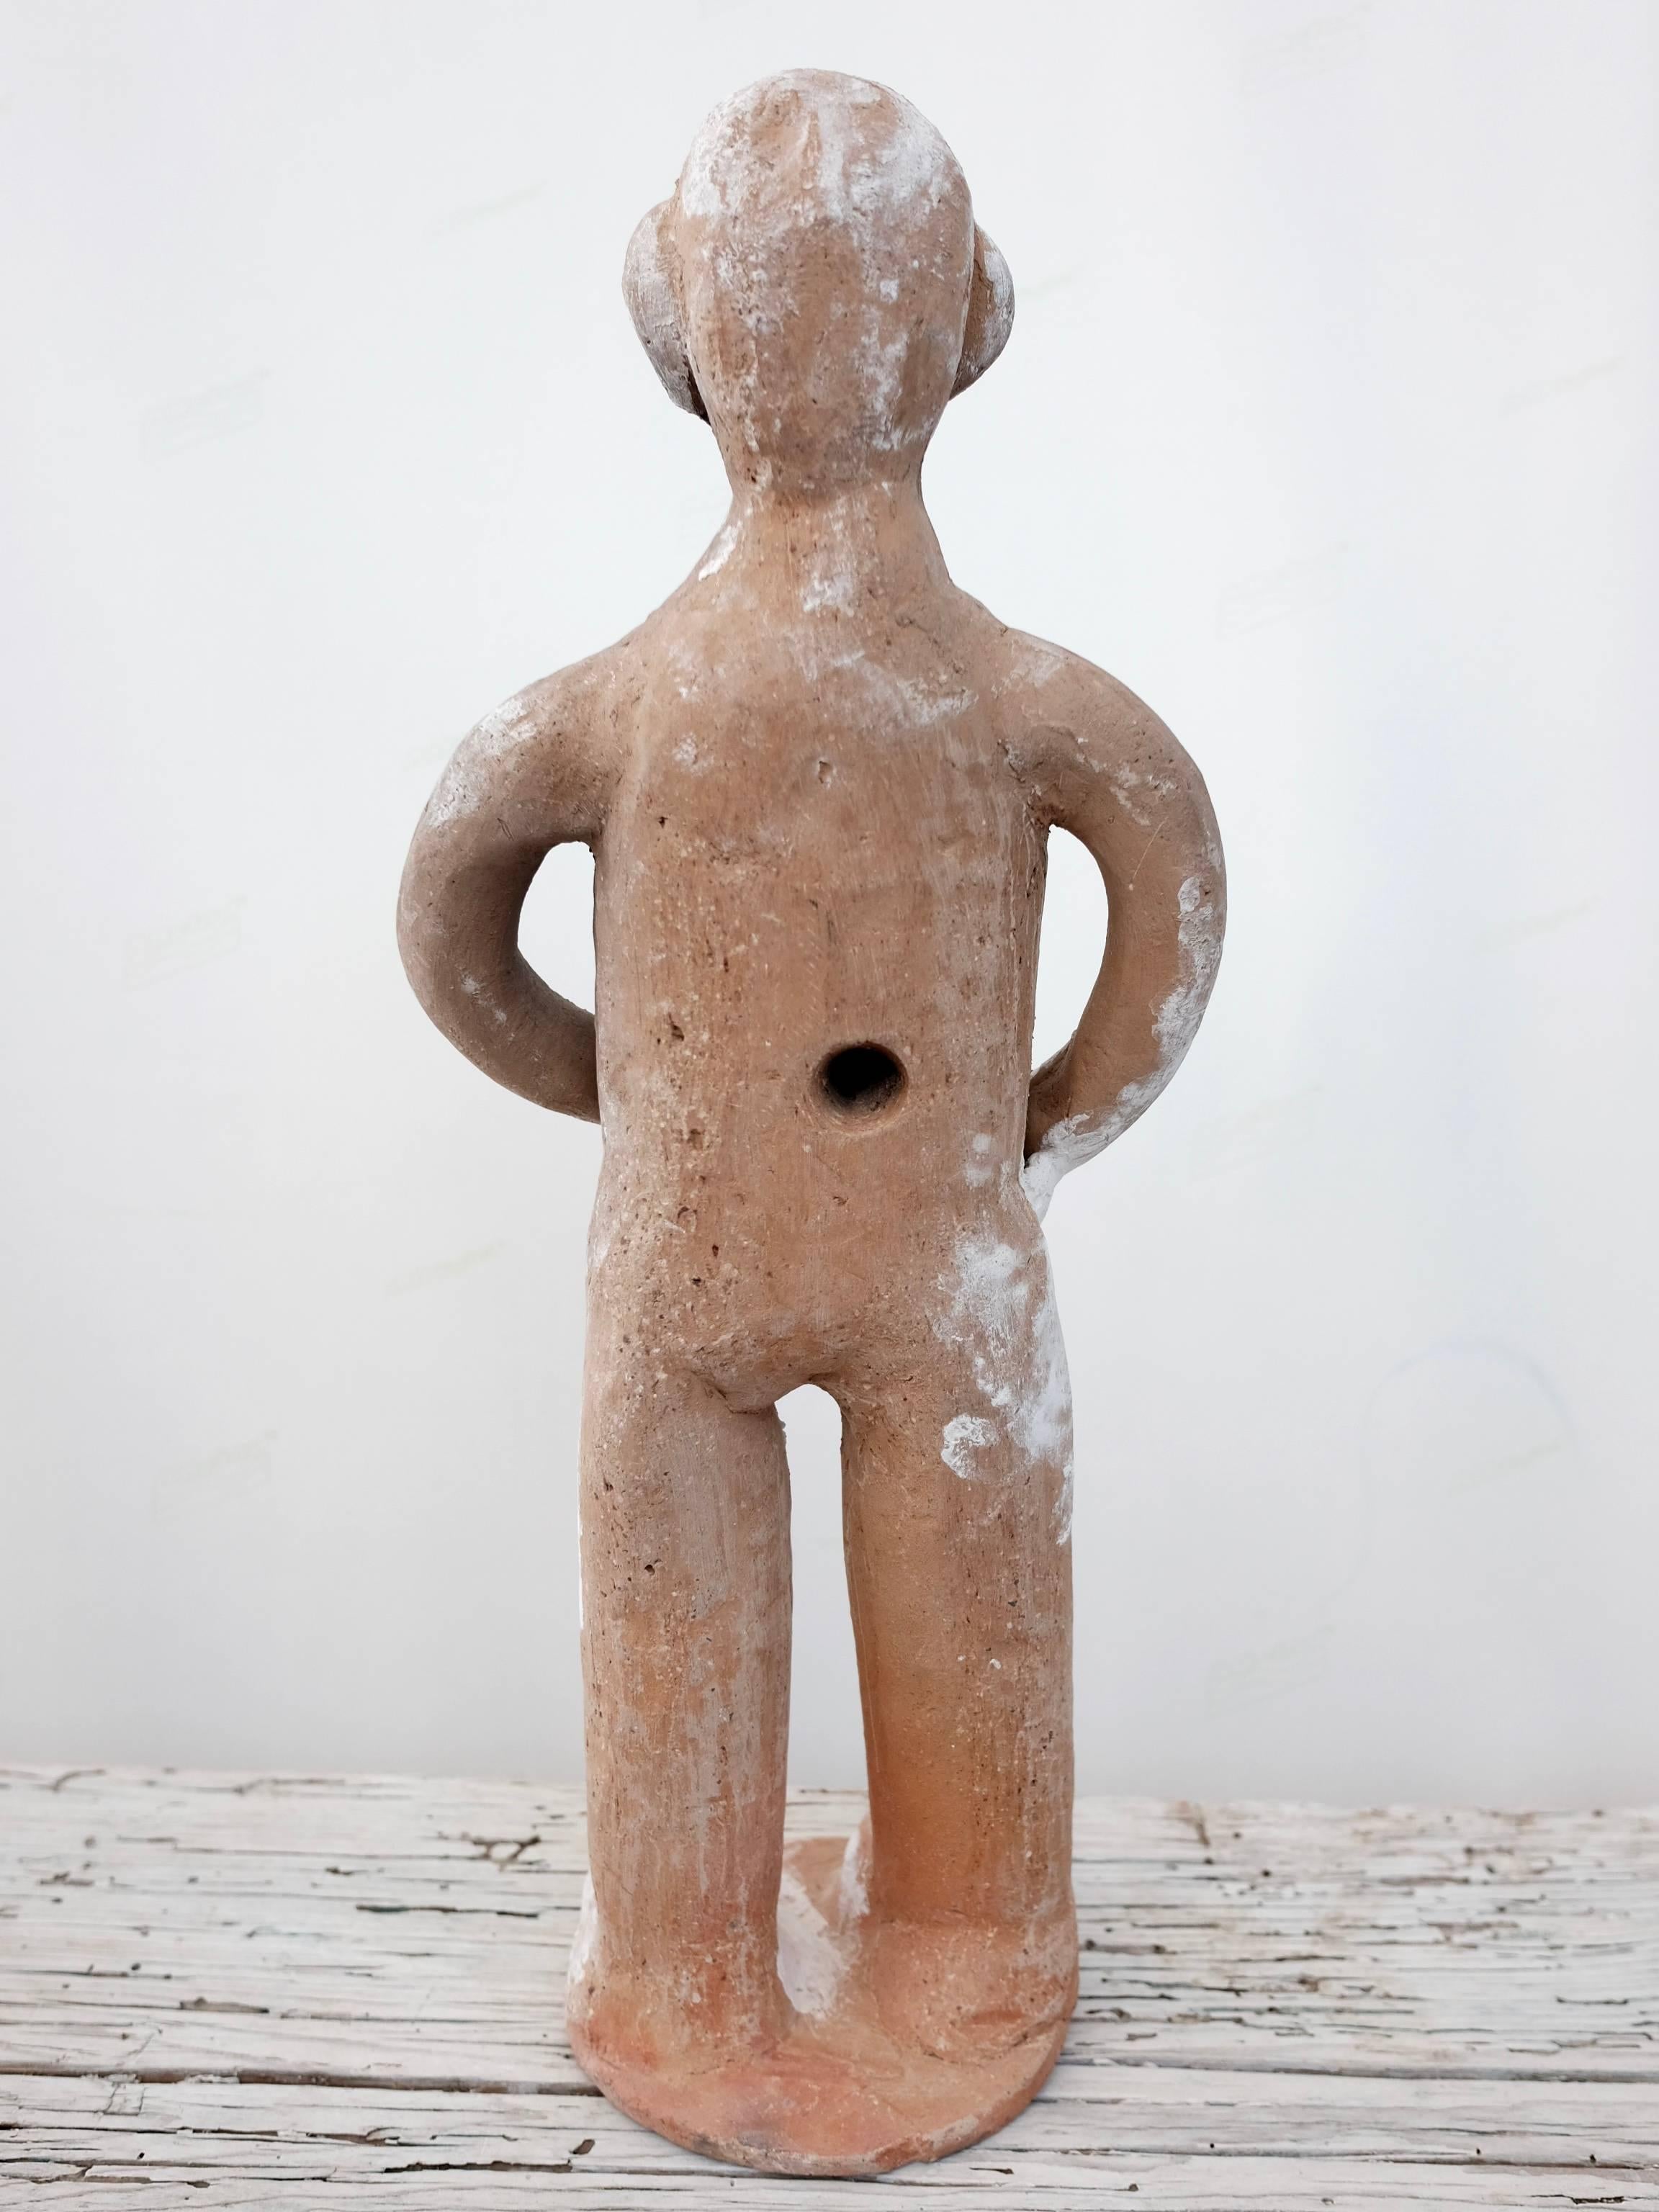 Fired Contemporary Clay Sculpture by Serapio Medrano from Jalisco, Mexico